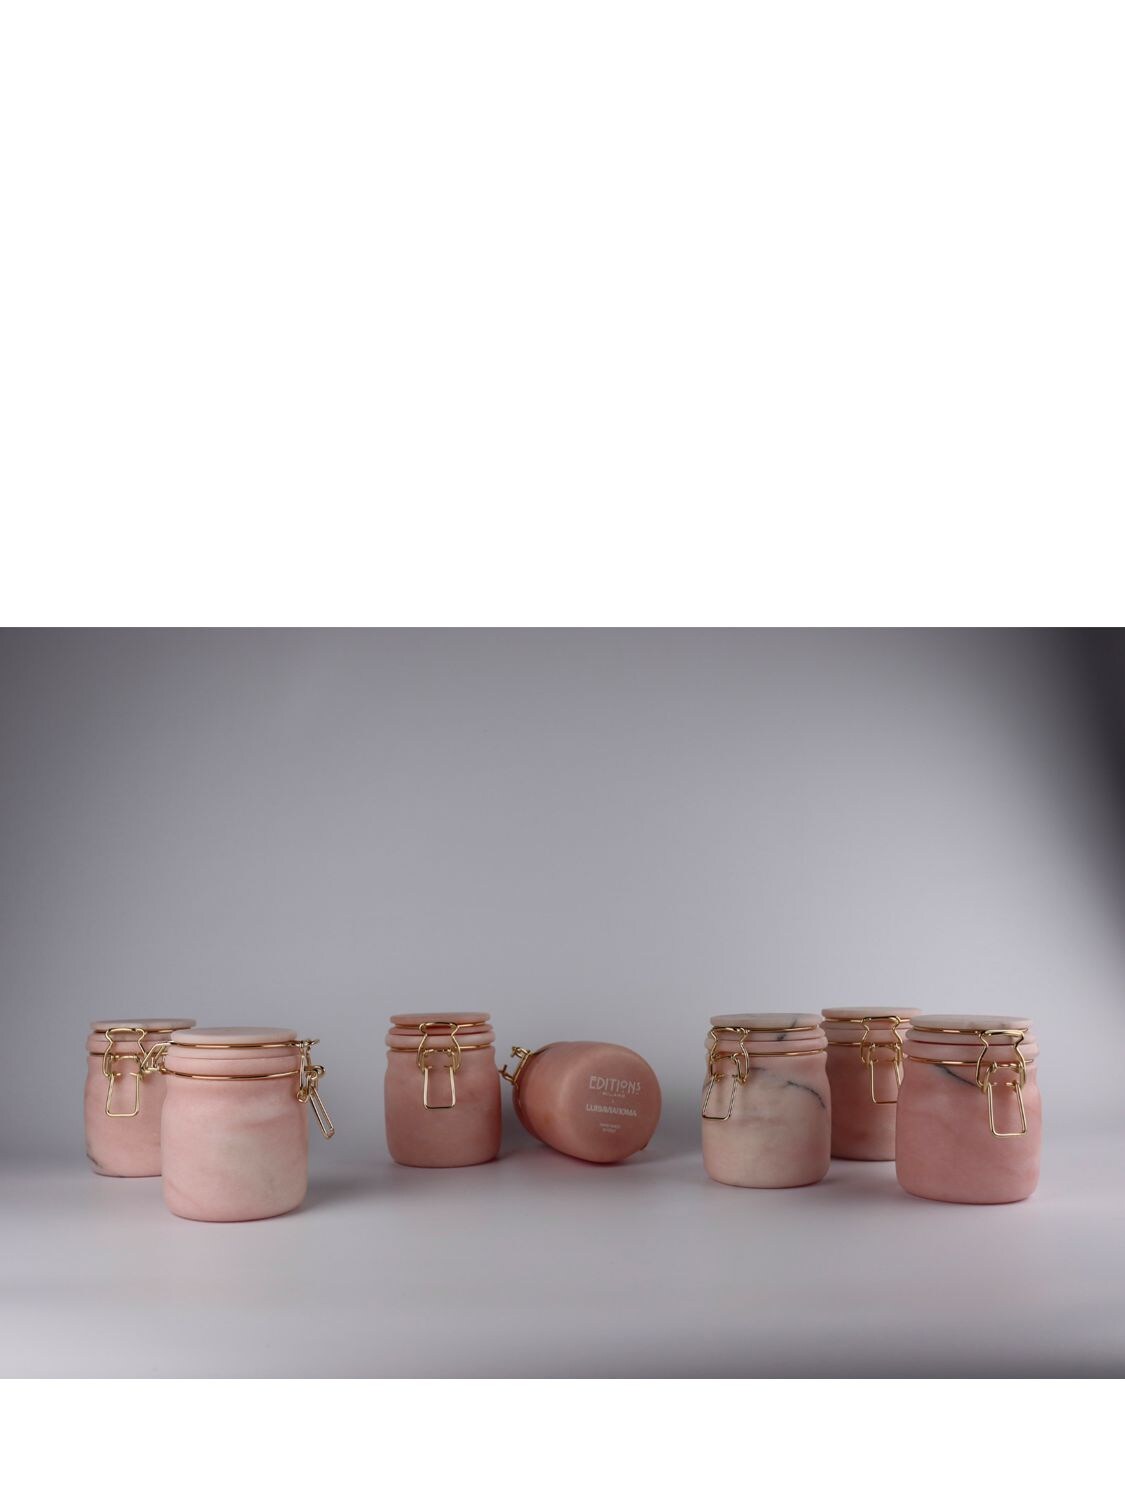 Shop Editions Milano Lvr Exclusive Miss Marble Jar In Pink